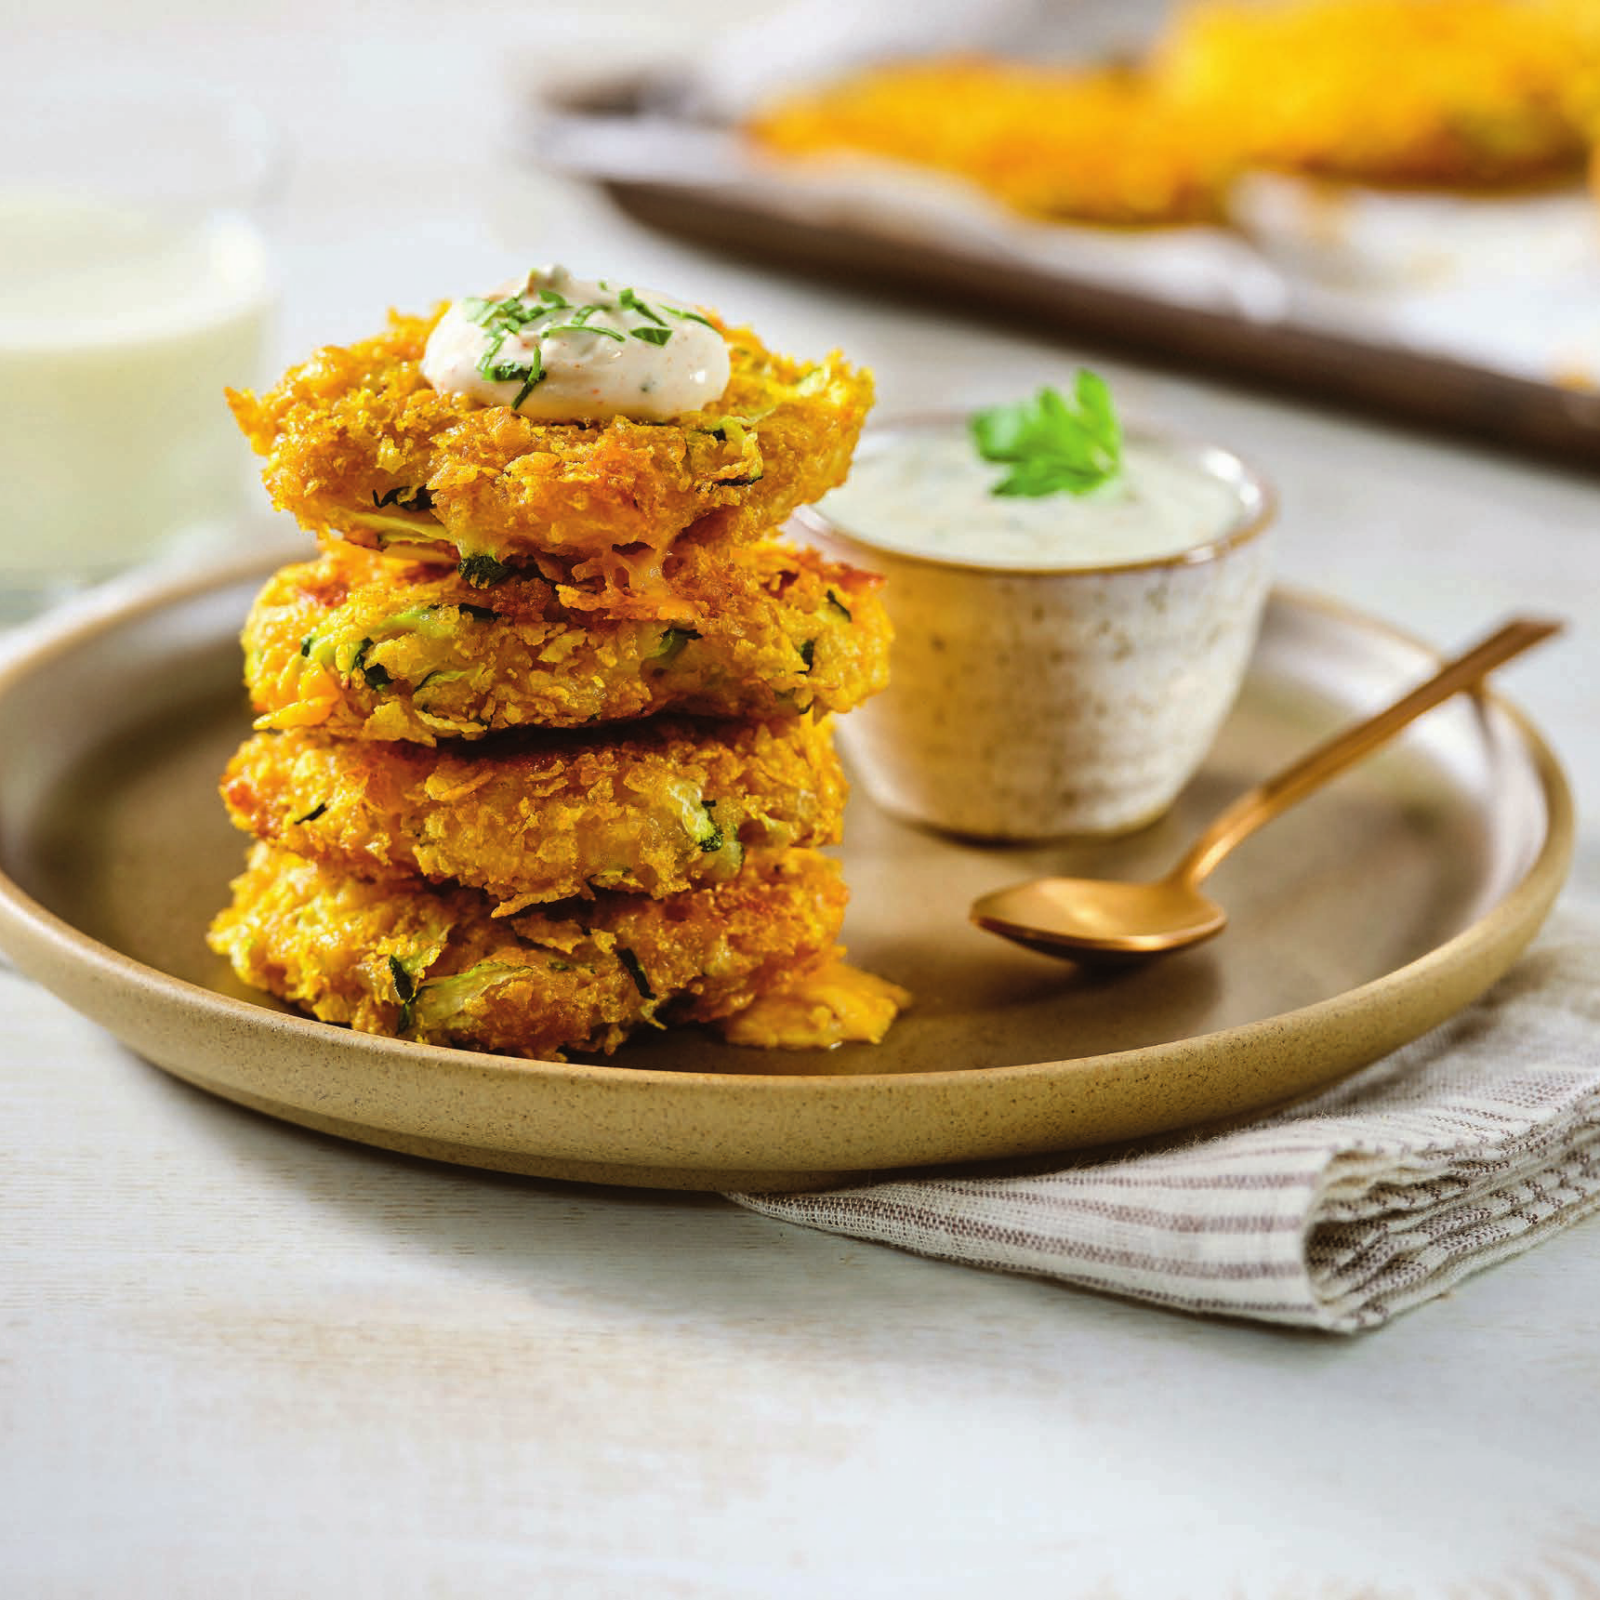 Crispy Zucchini & Cheese Fritters with Sour Cream Dip